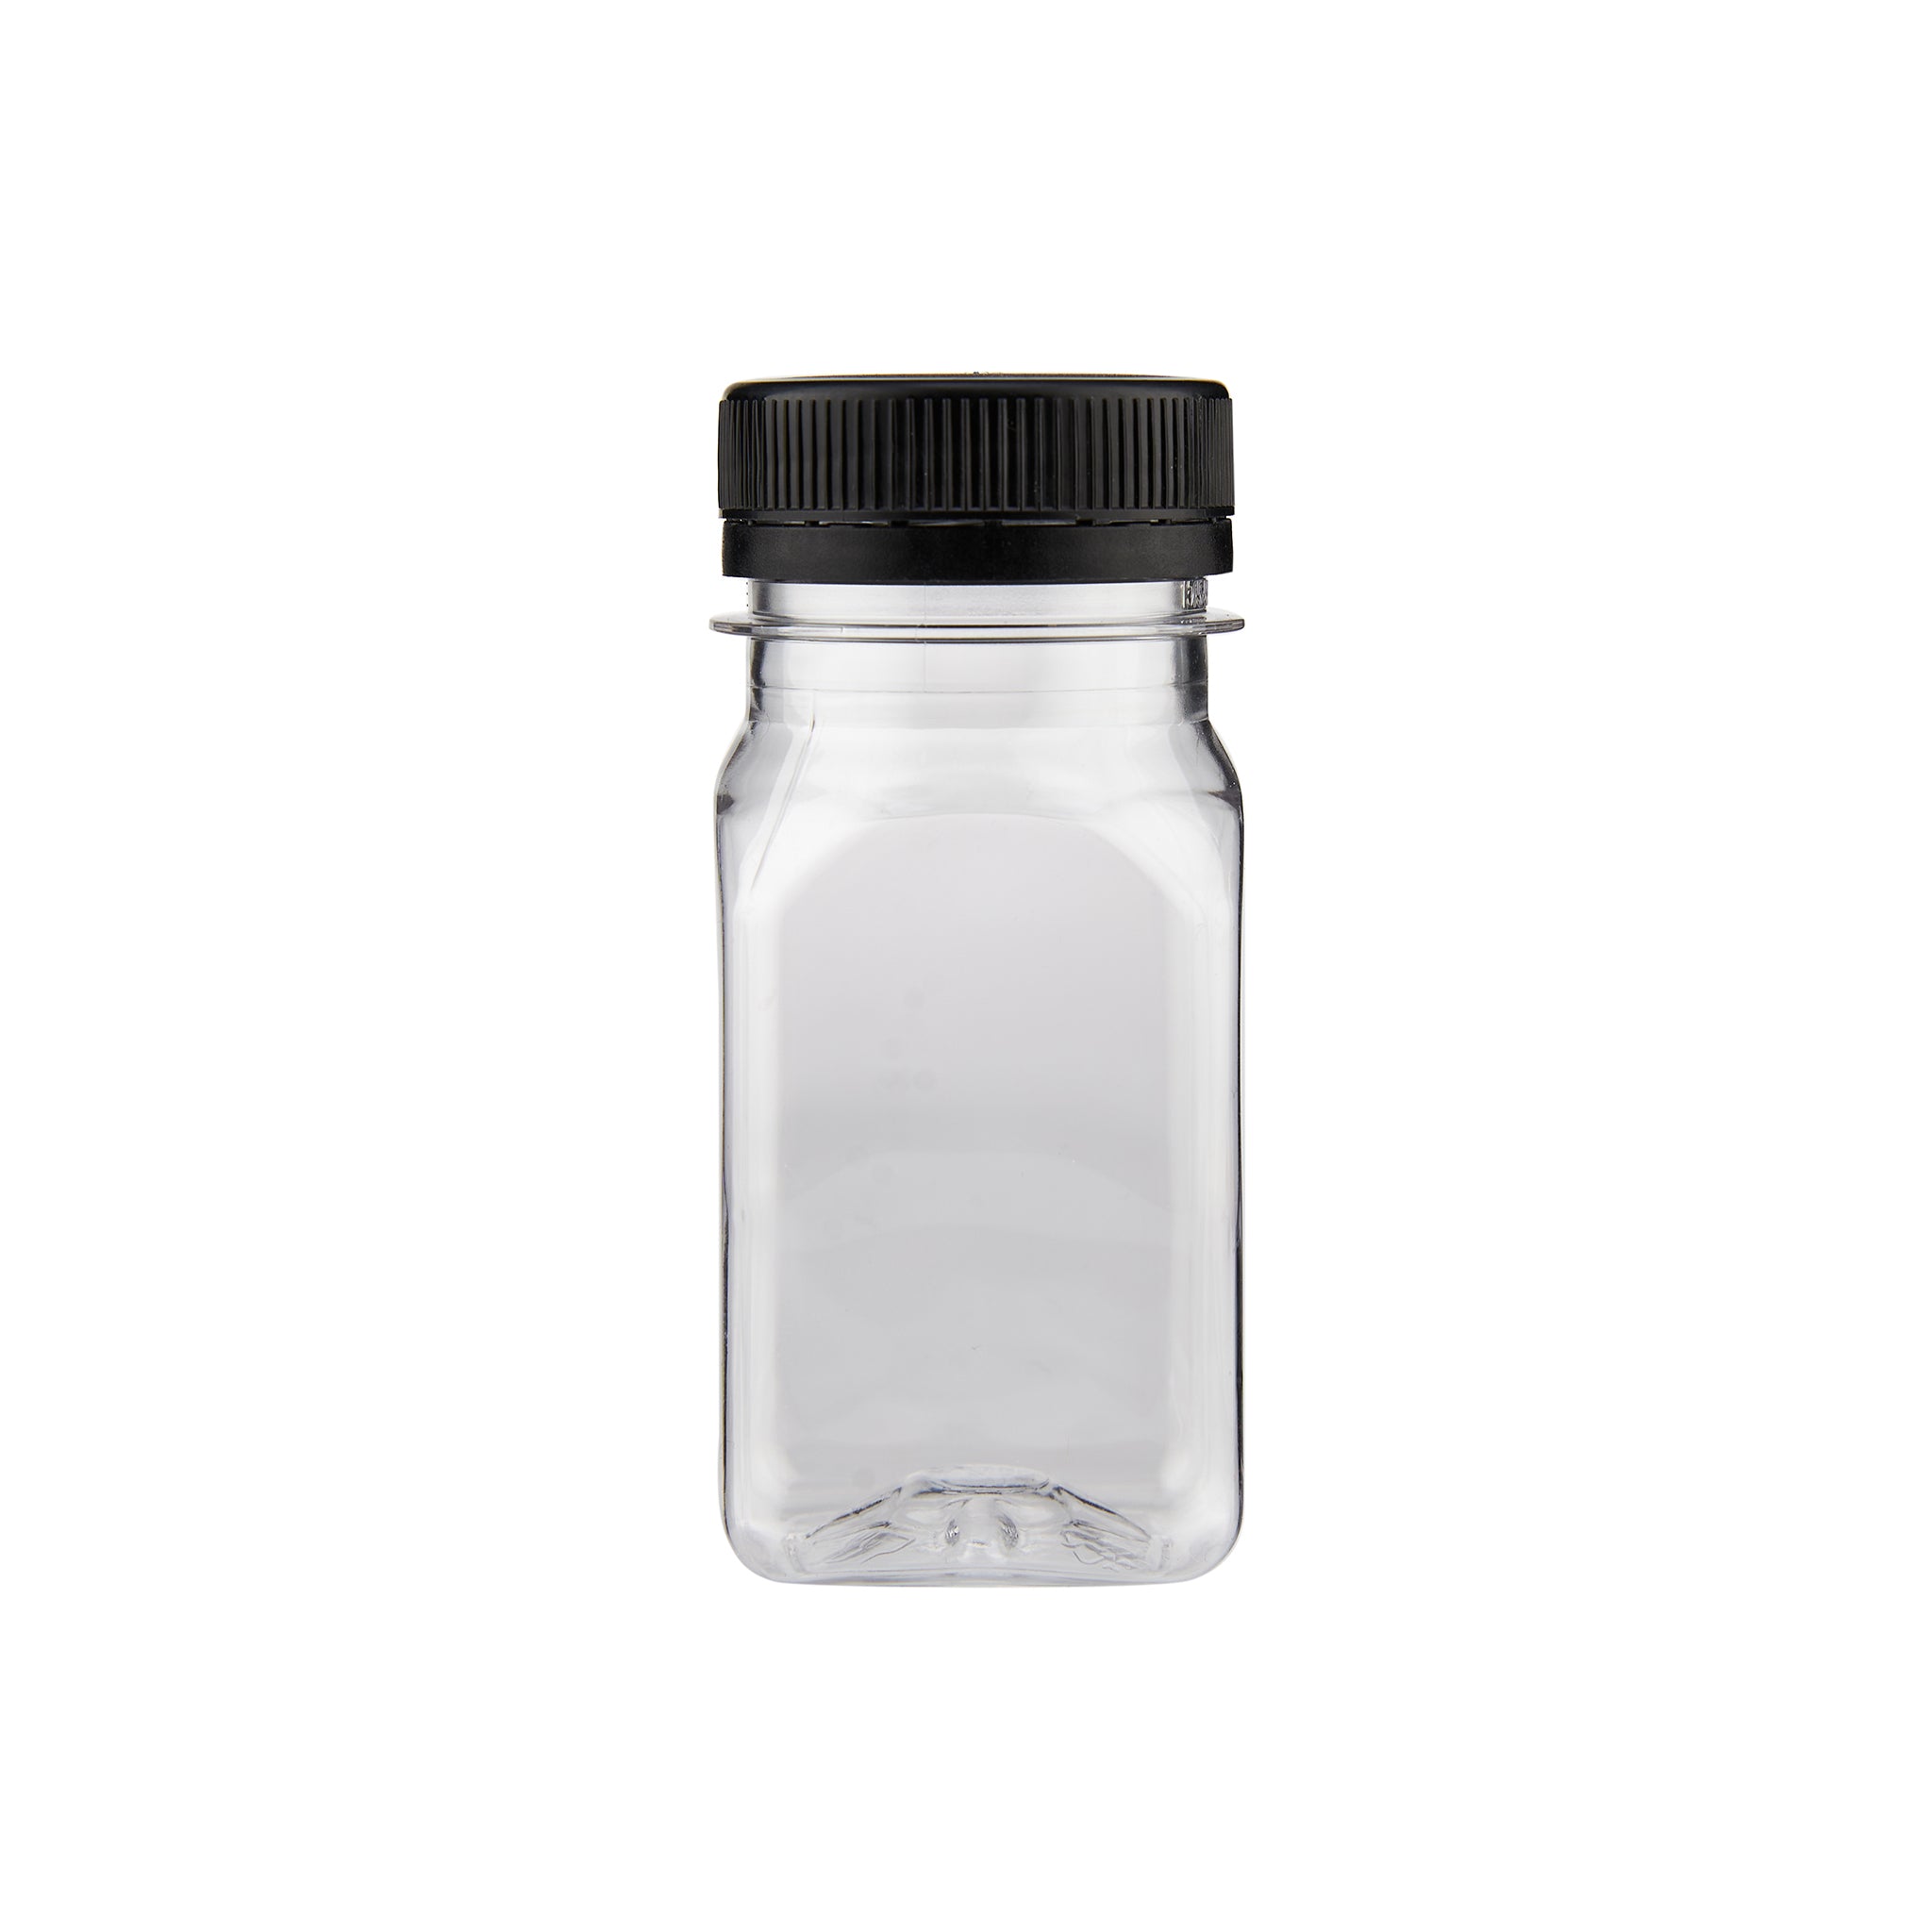 Plastic Square Bottle with Black Cap 100ml - Hotpack Global